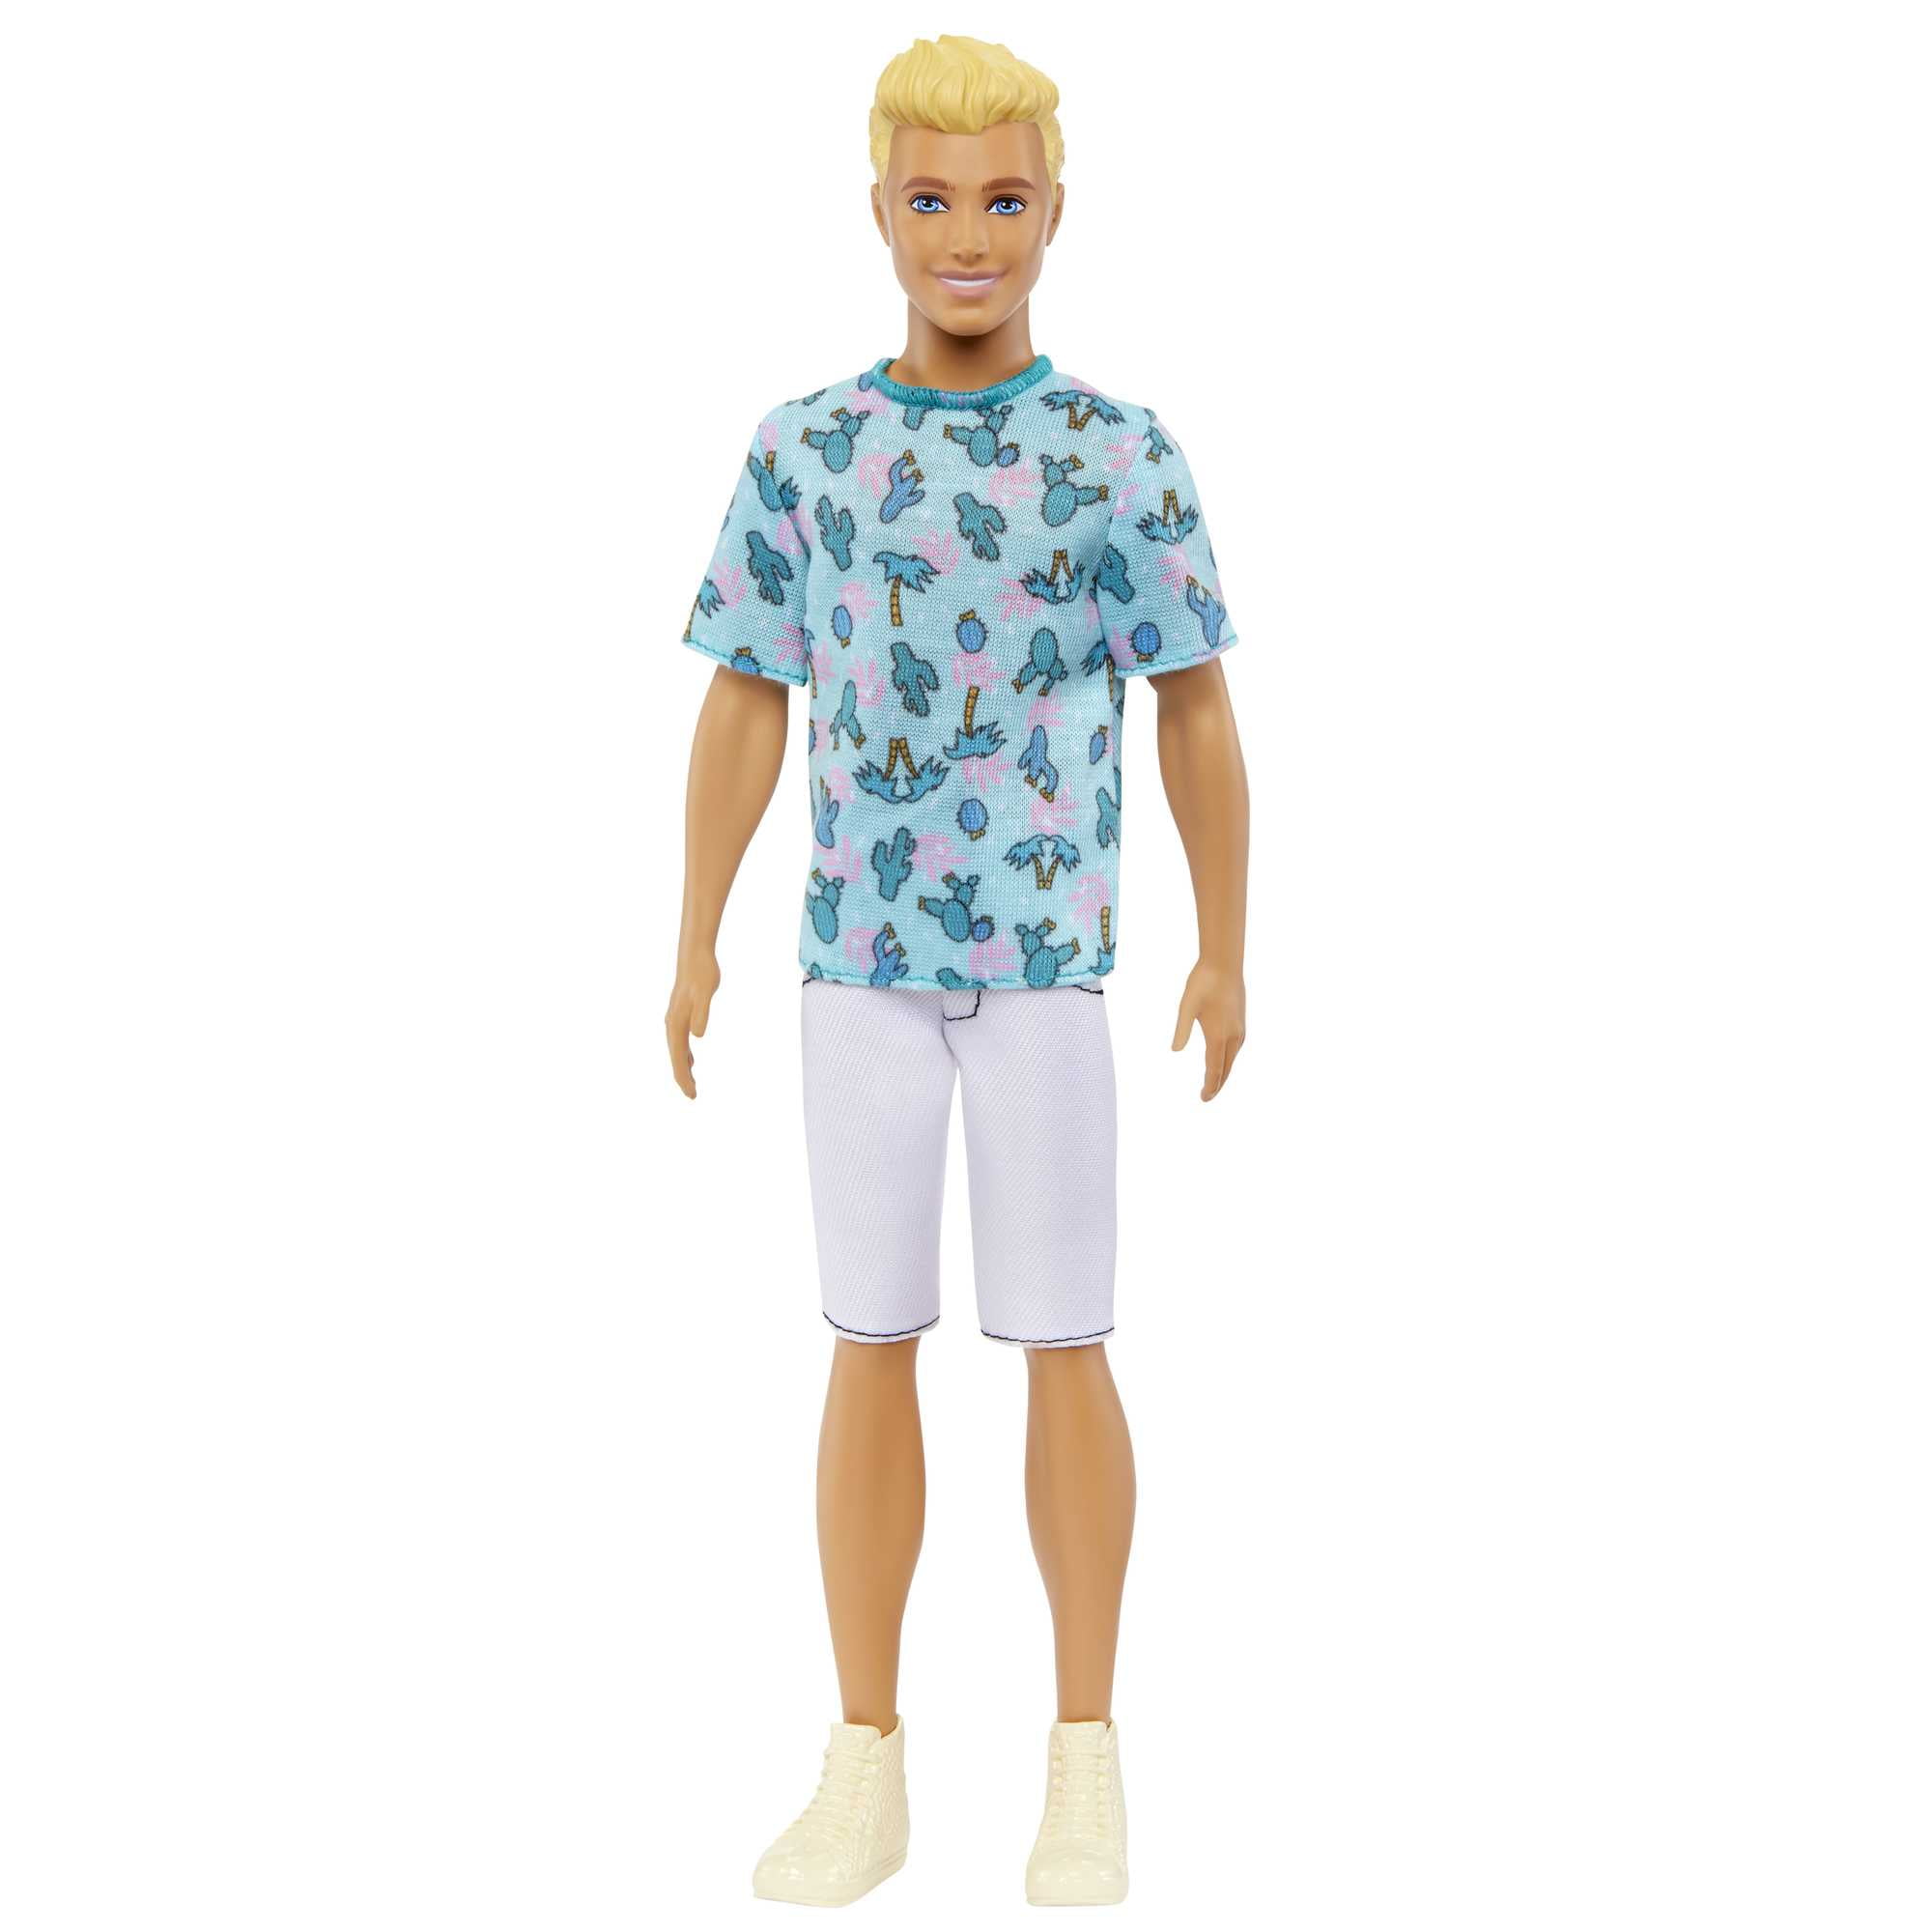 Lot 8 Items Clothes for Ken Doll EU CEEN71 Certified Include 3 Sets Casual  Wear 3 Pcs Dolls Pants 2 Shoes